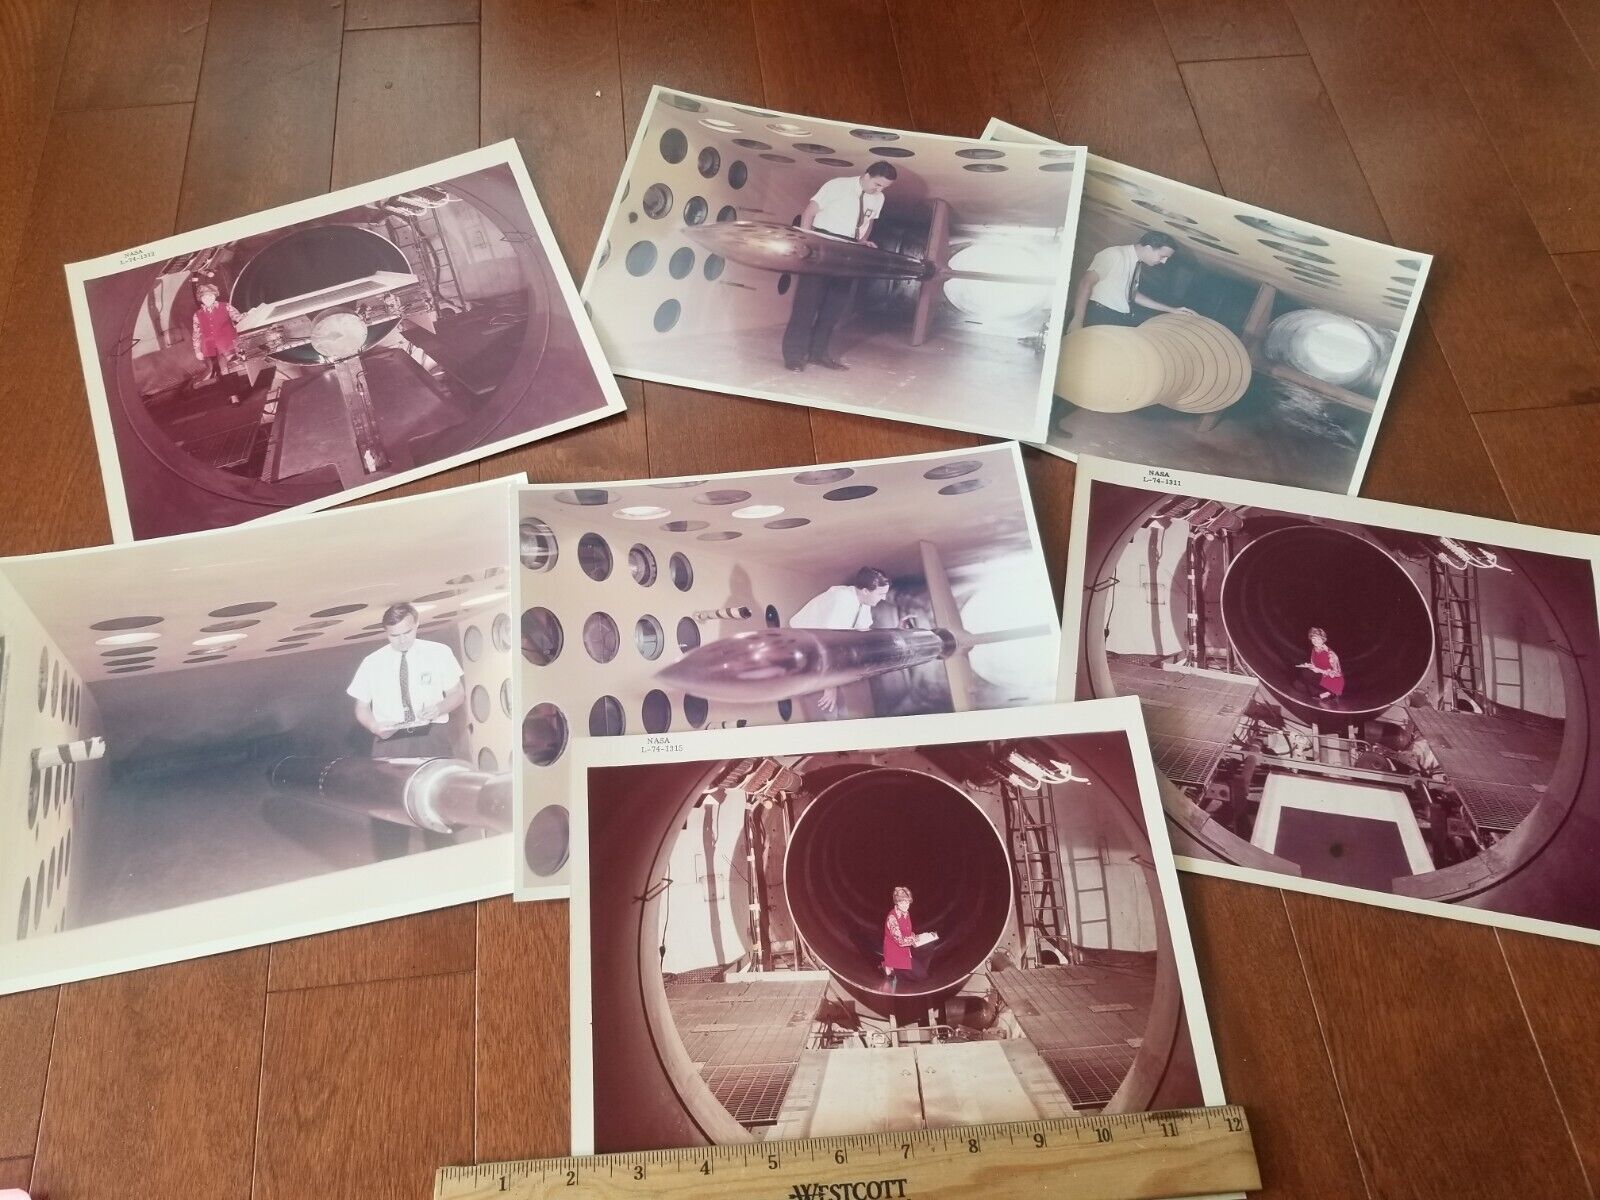 7 c. 1968 NASA Langley Research Wind Tunnel Items Photos Former Employee